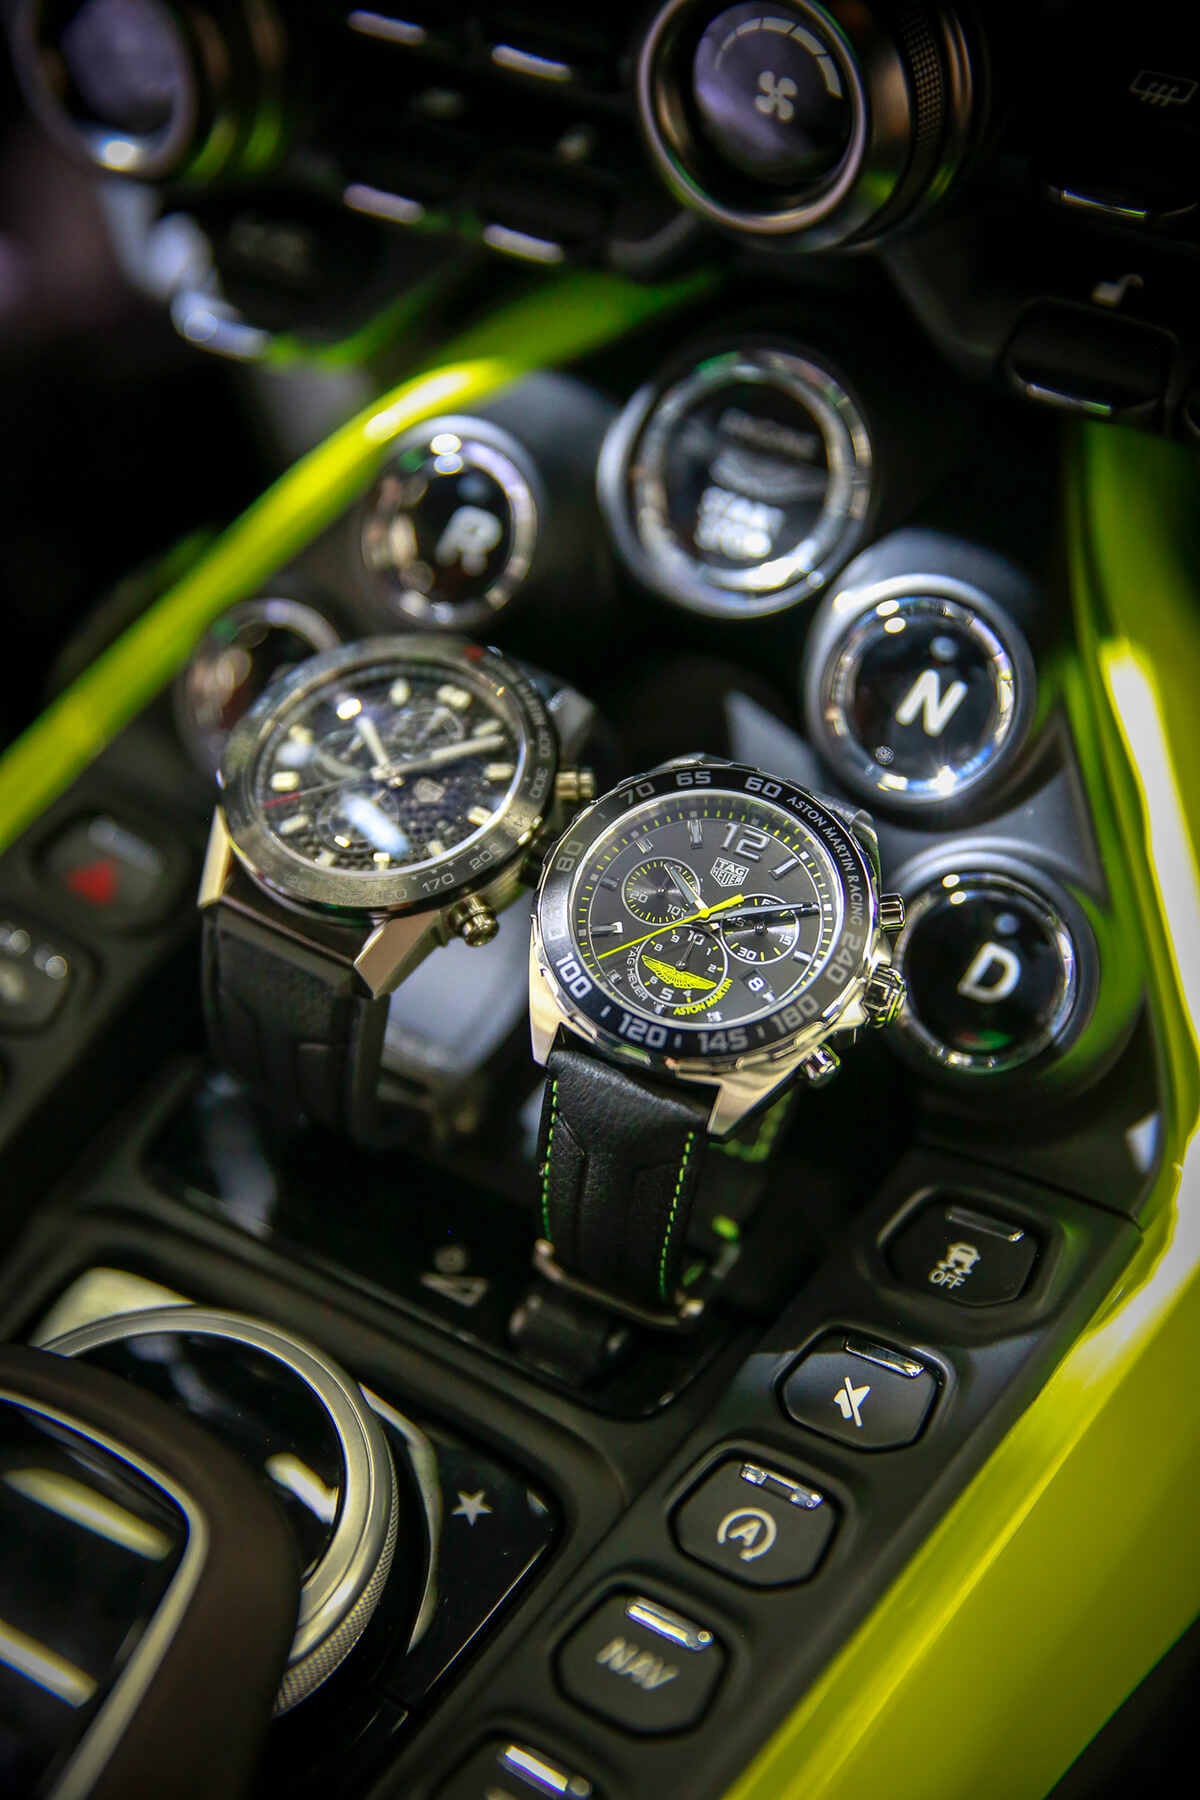 TAG Heuer timepieces shown in the cockpit of a racing car